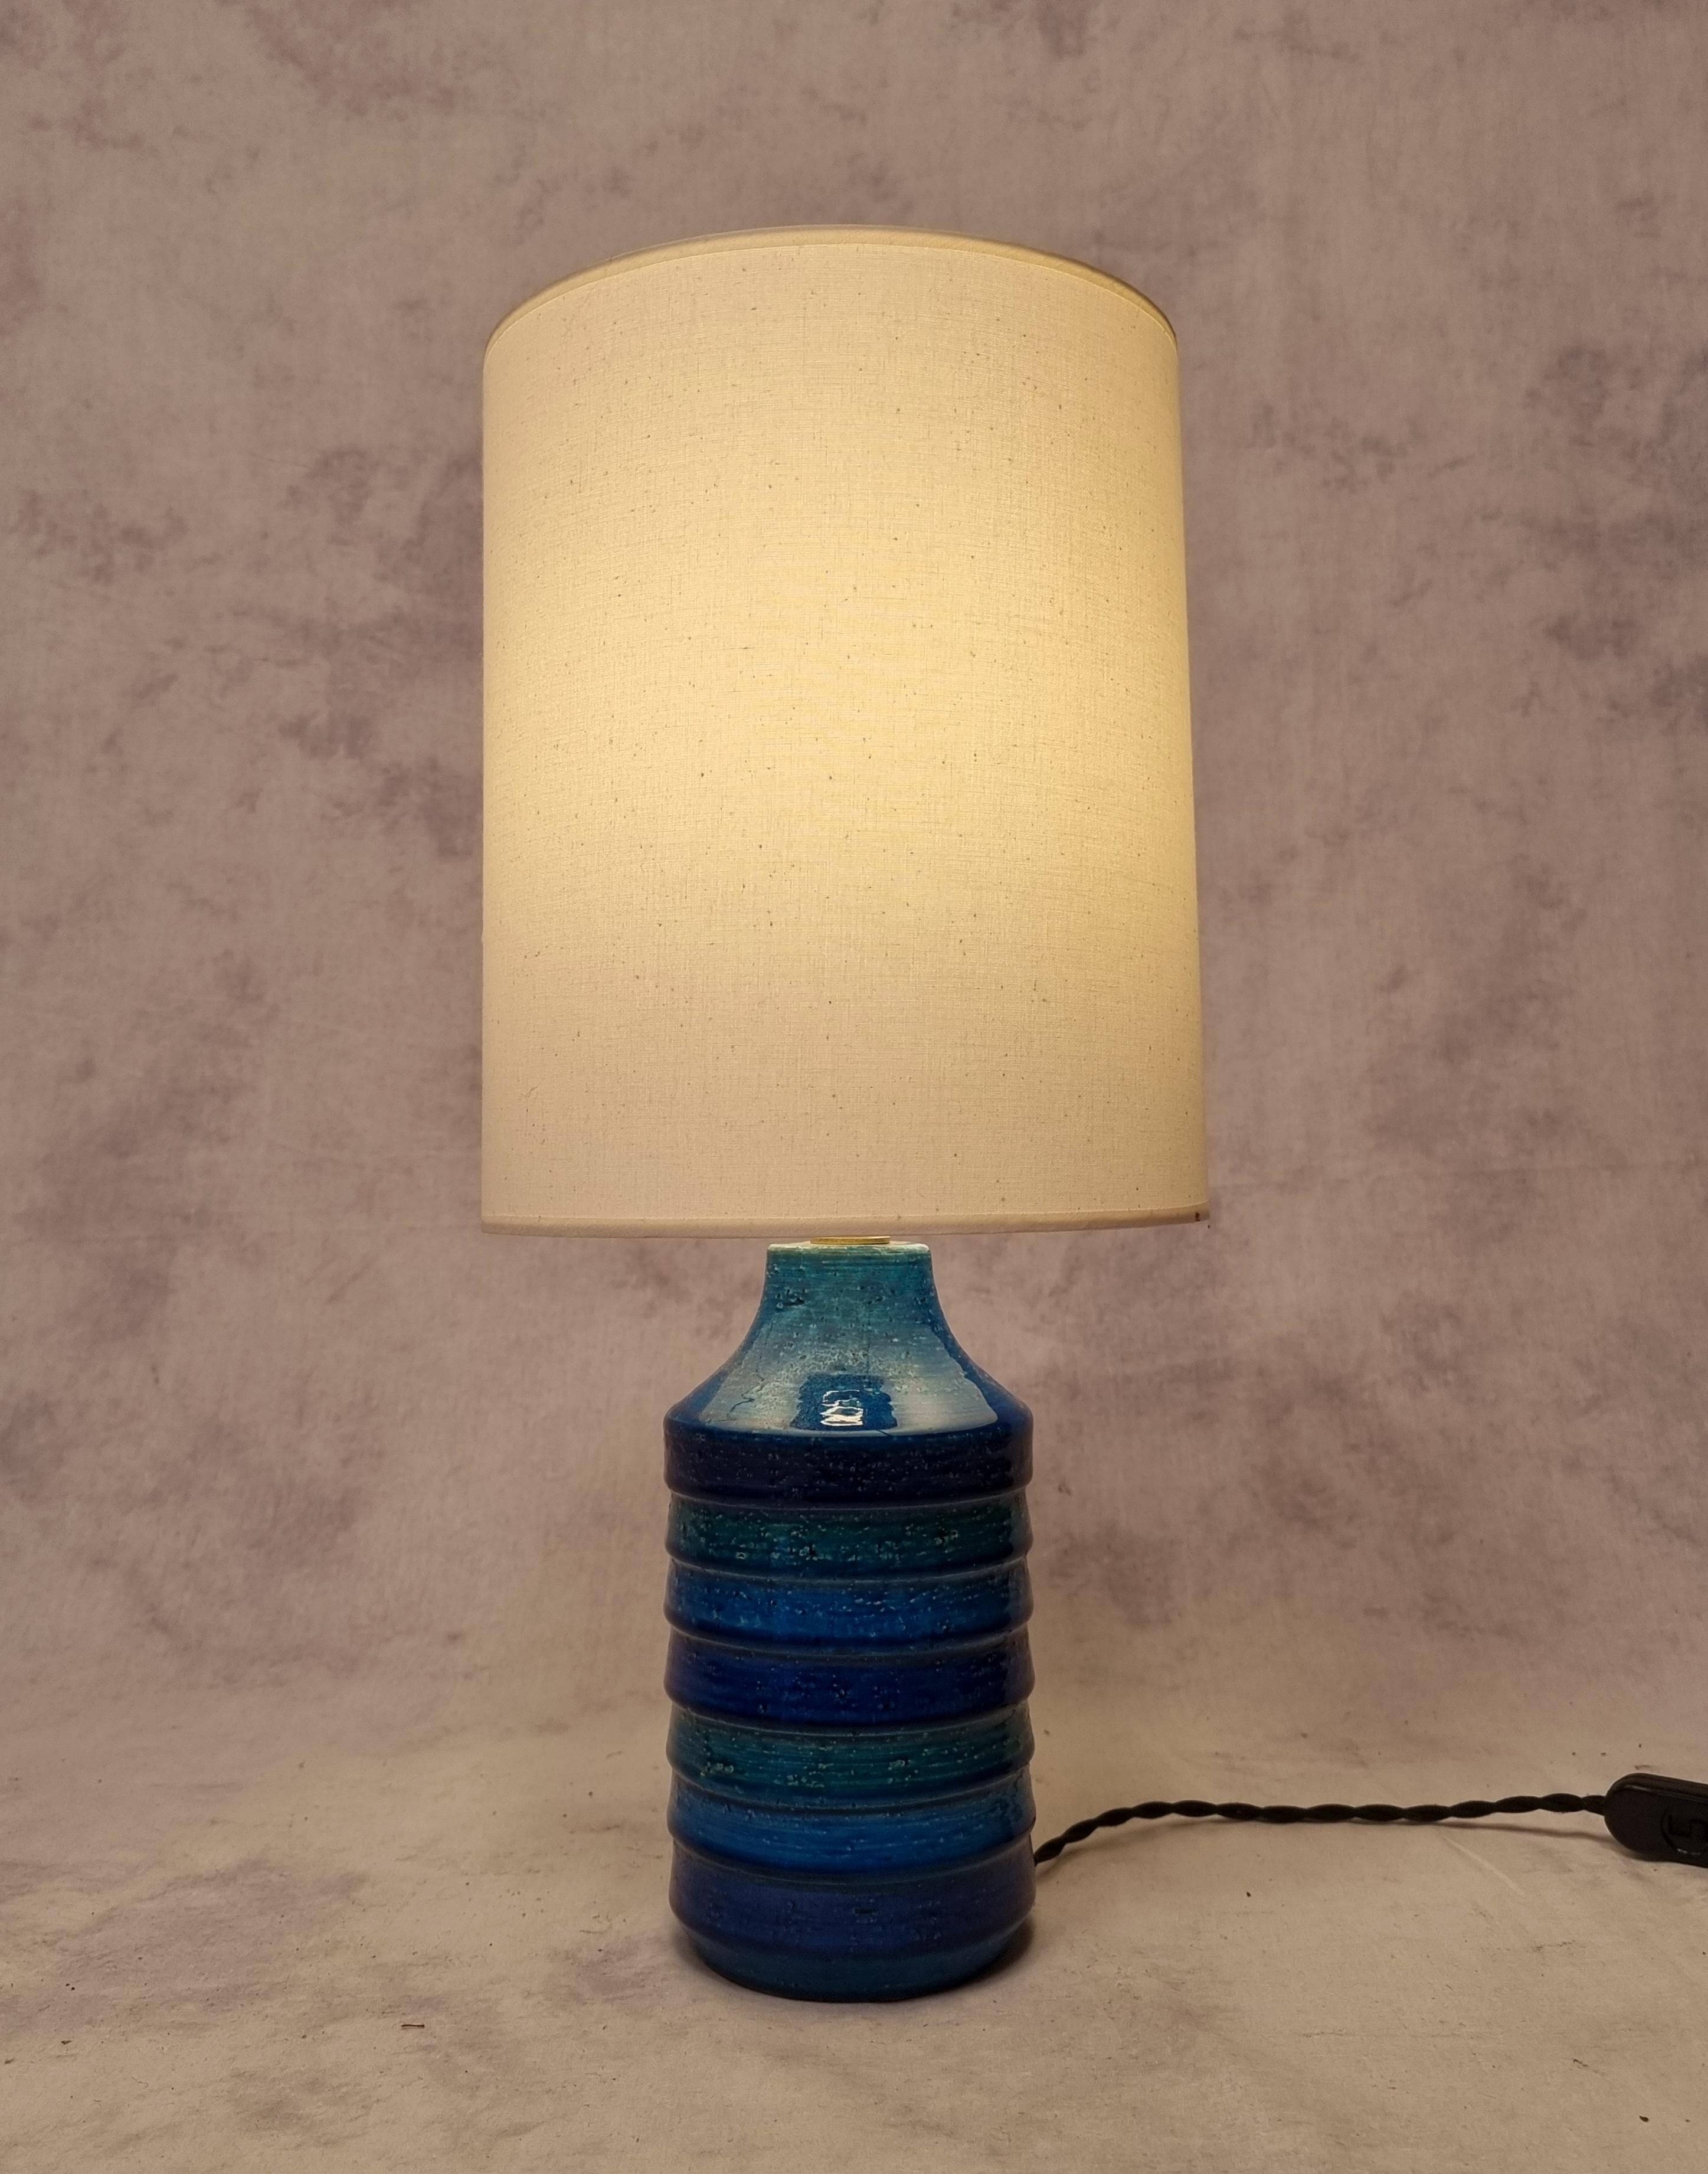 Beautiful table lamp by Italian designer Aldo Londi produced by Bitossi in the 1960s. This glazed ceramic lamp is in Aldo Londi's reference color 